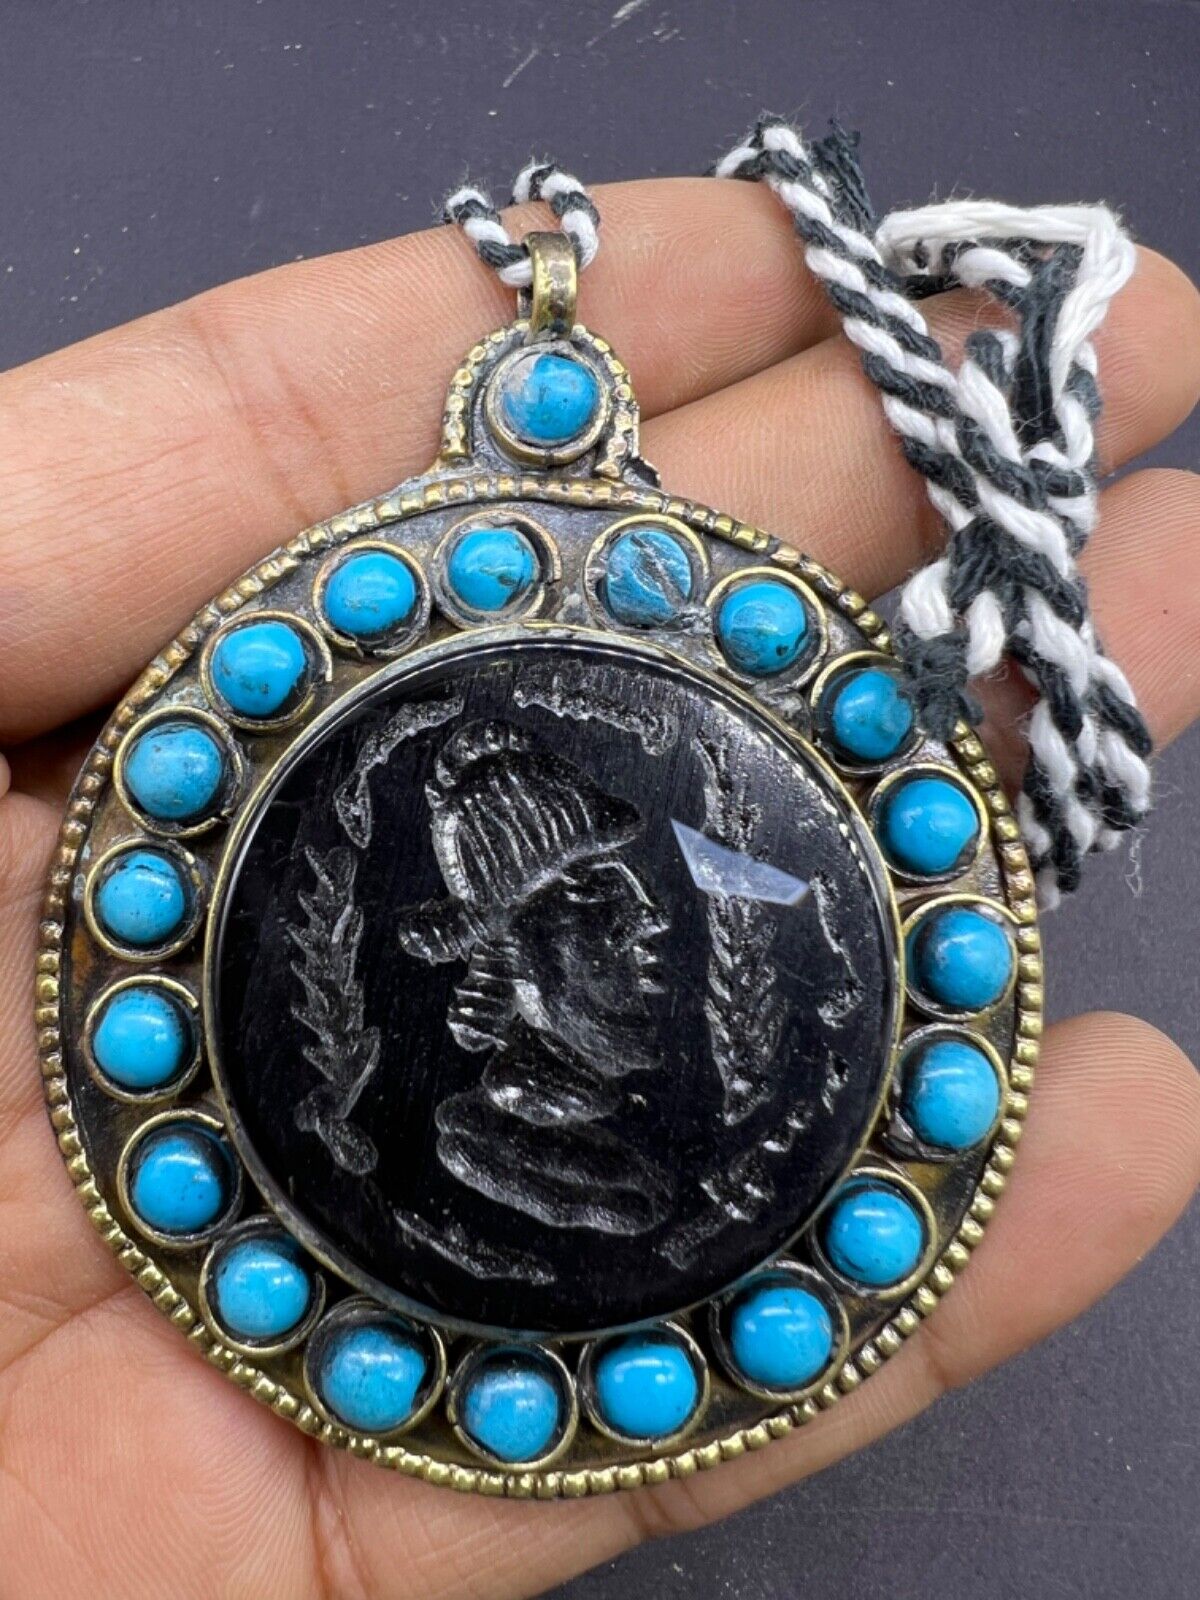 Vintage Beautiful Central Asian Jewelries Mixed Slivered Pendent With Intaglio